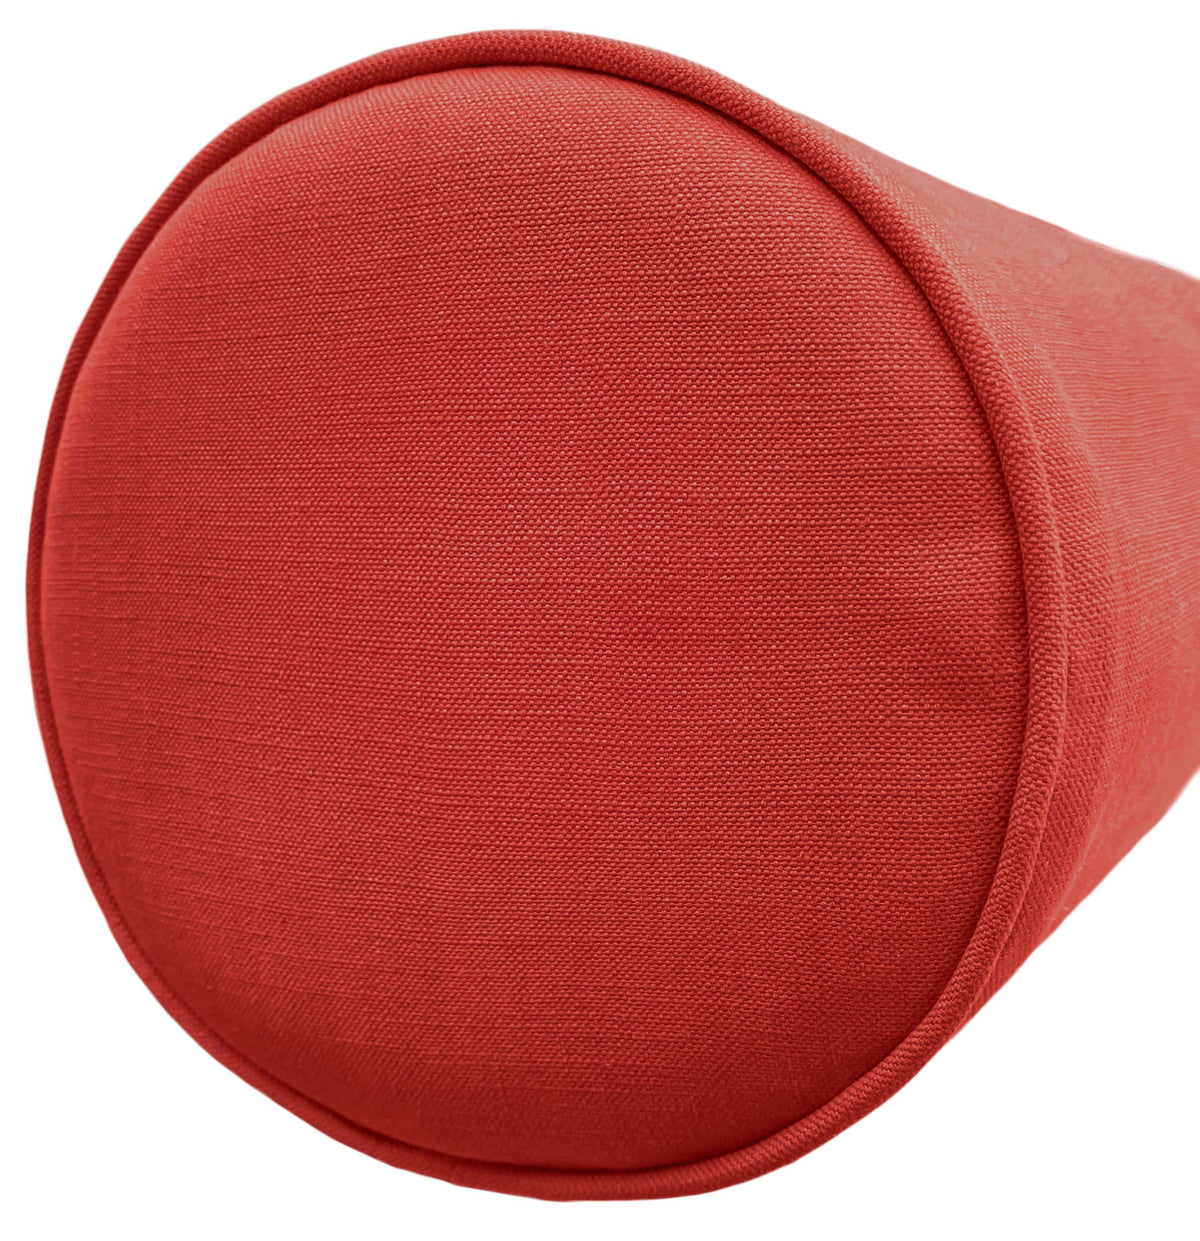 THE BOLSTER :: CLASSIC LINEN // APPLE RED